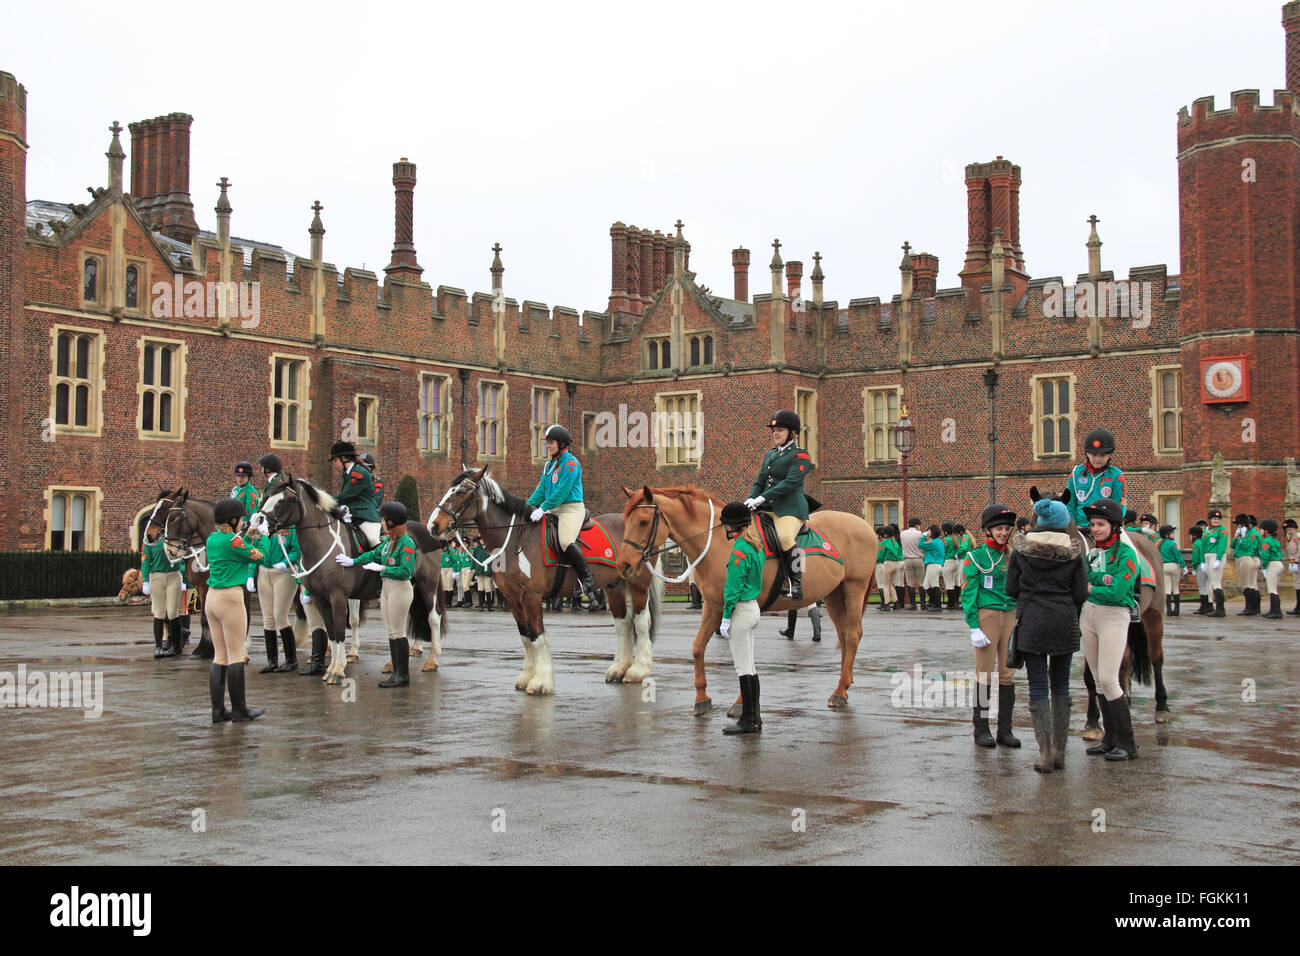 Hampton Court Palace, East Molesey, Surrey, England, UK. 20th February, 2016. Annual parade to mark the foundation of the charity which provides riding and horse care skills to young people including some who are disabled or have learning difficulties. Credit:  Ian Bottle/Alamy Live News Stock Photo